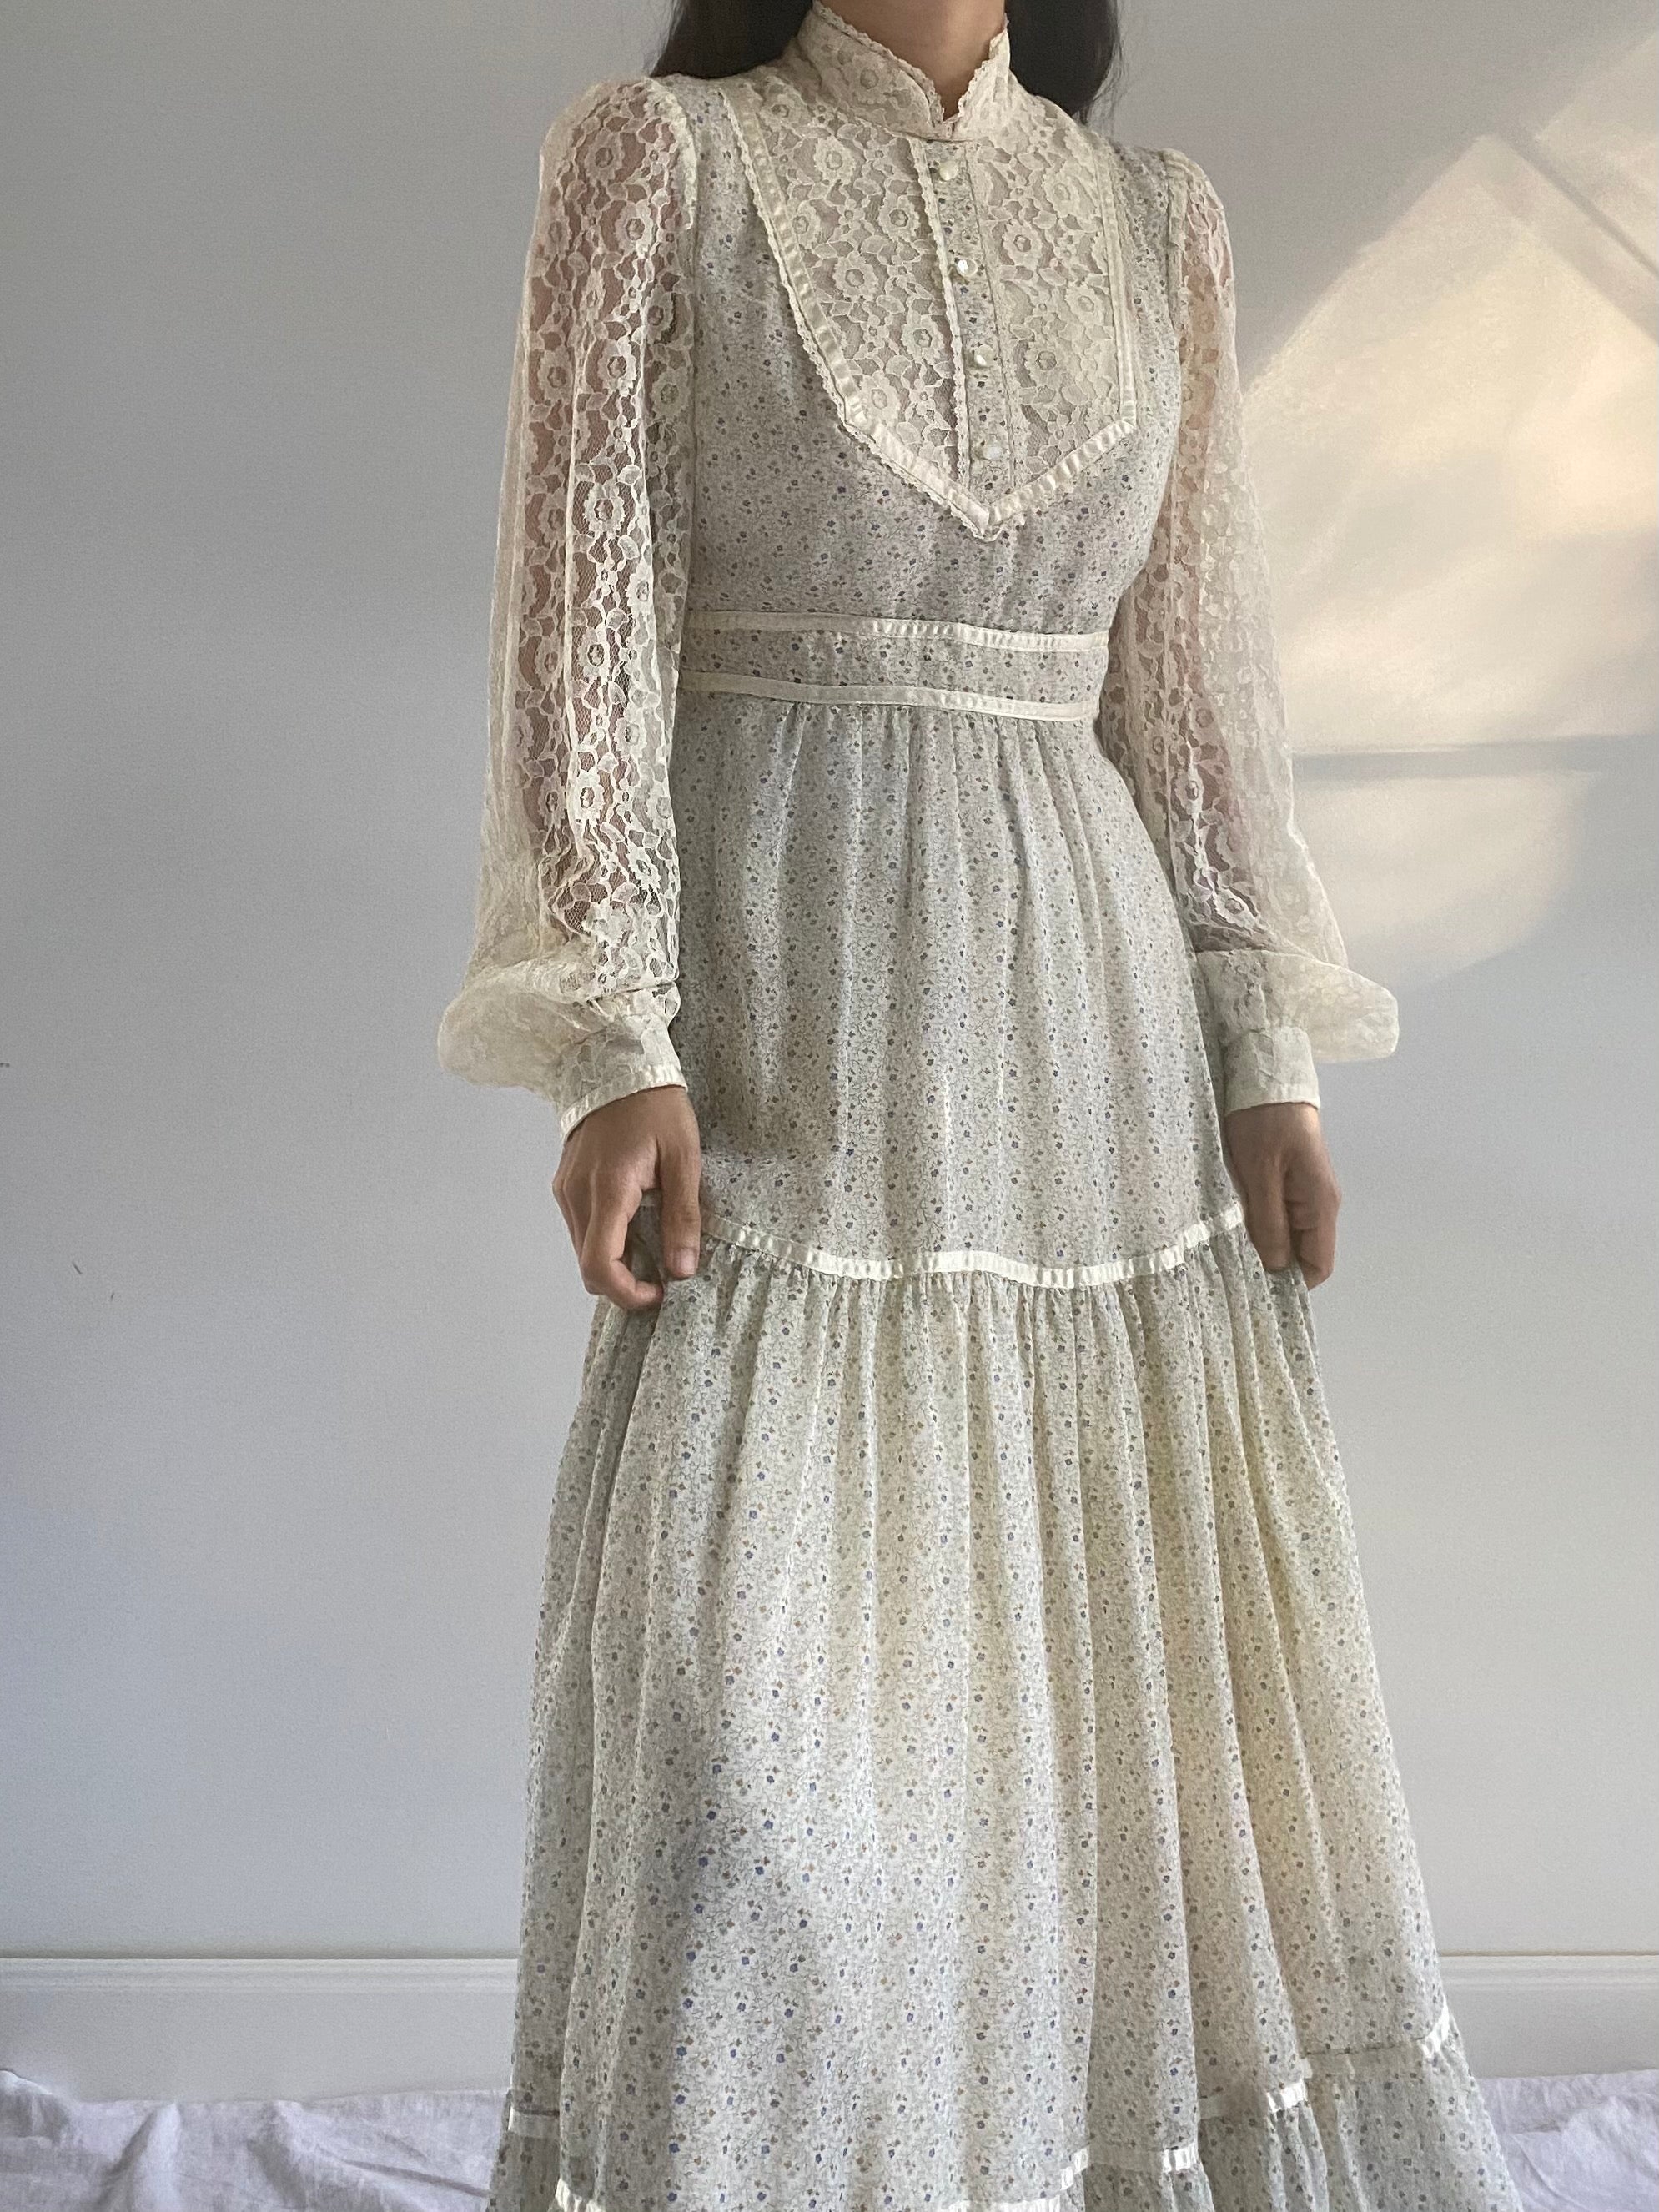 Vintage Lace Sleeves Calico Dress - XS/S